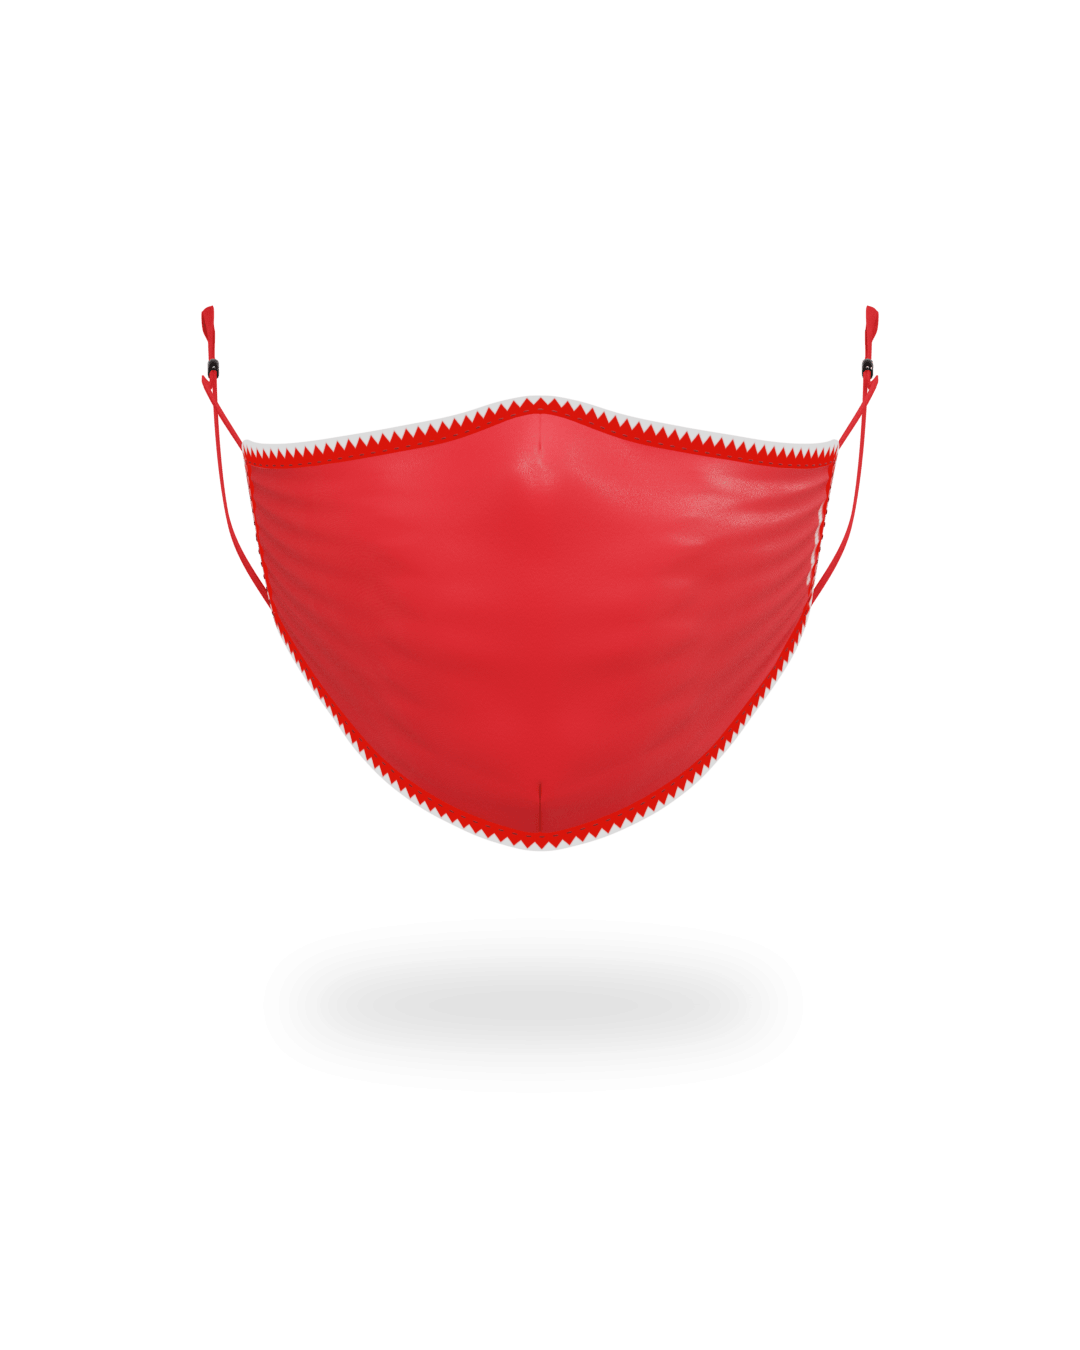 Discount | Adult Vertical Shark (Red) Form-Fitting Face Mask Sprayground Sale - Discount | Adult Vertical Shark (Red) Form-Fitting Face Mask Sprayground Sale-31